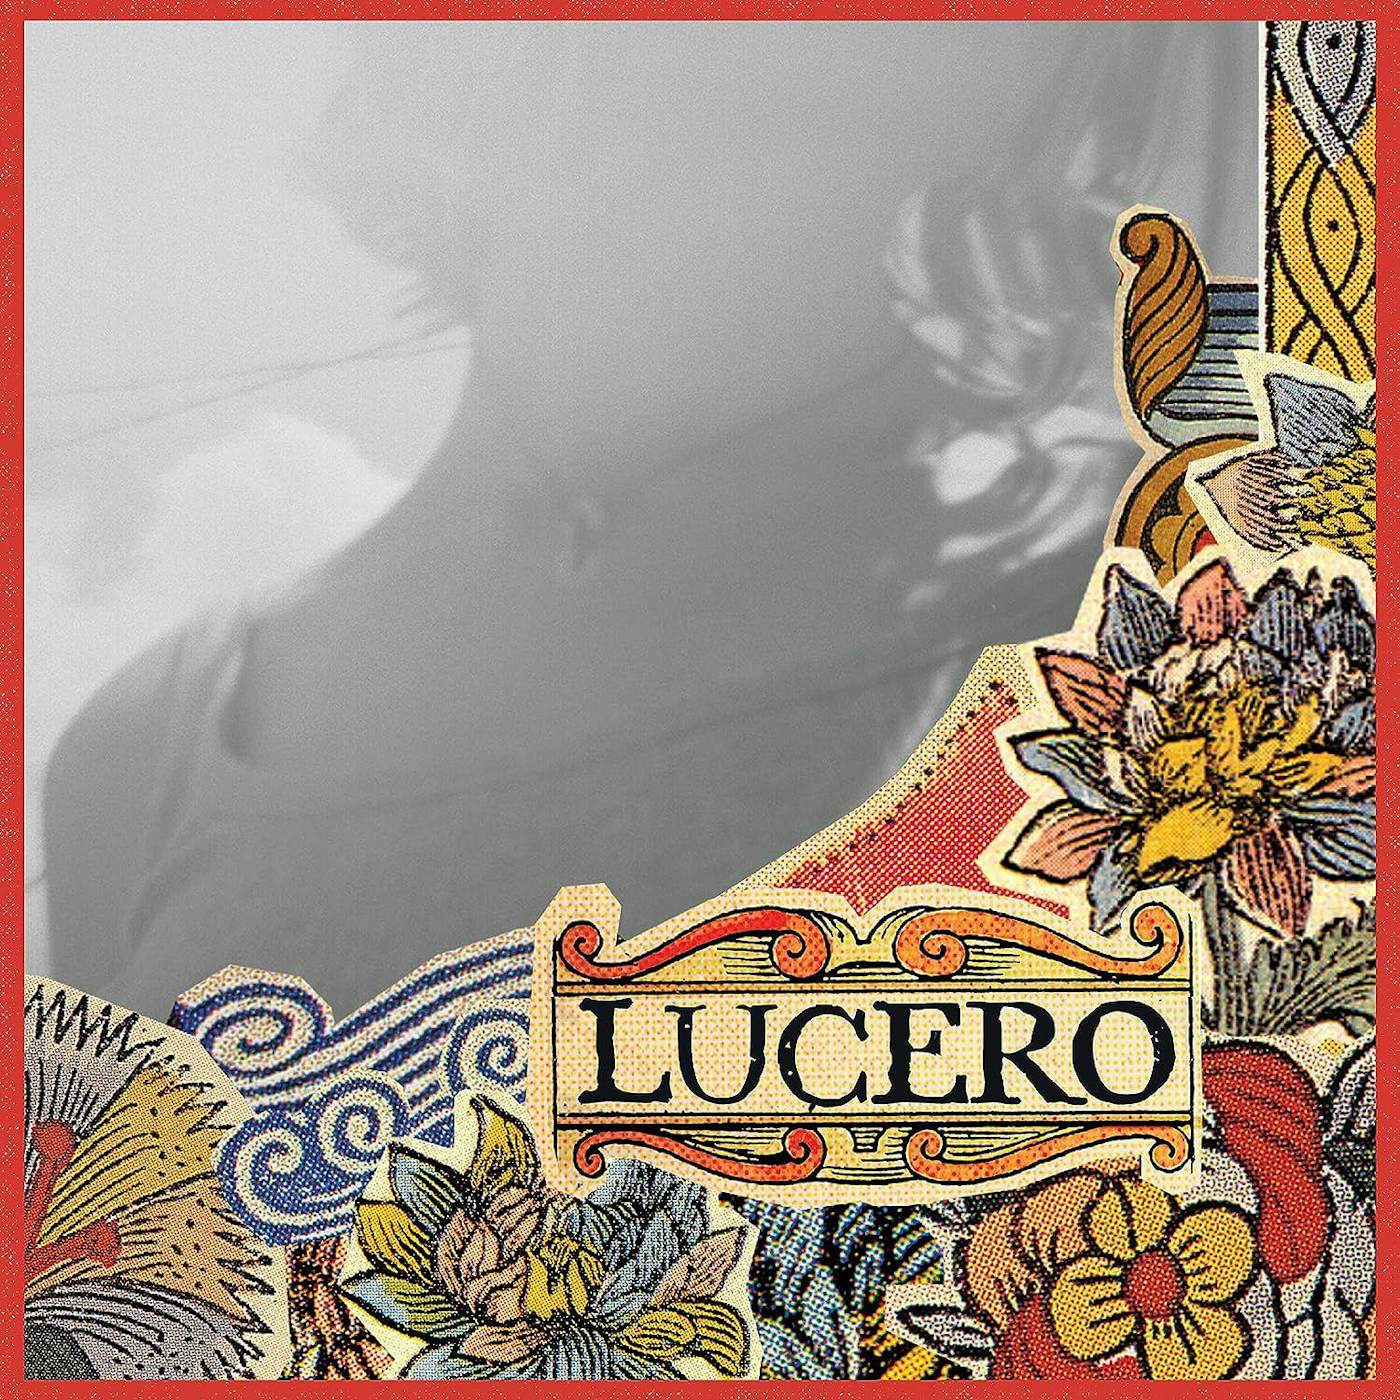 Lucero That Much Further West (20th Anniversary Edition) Vinyl Record